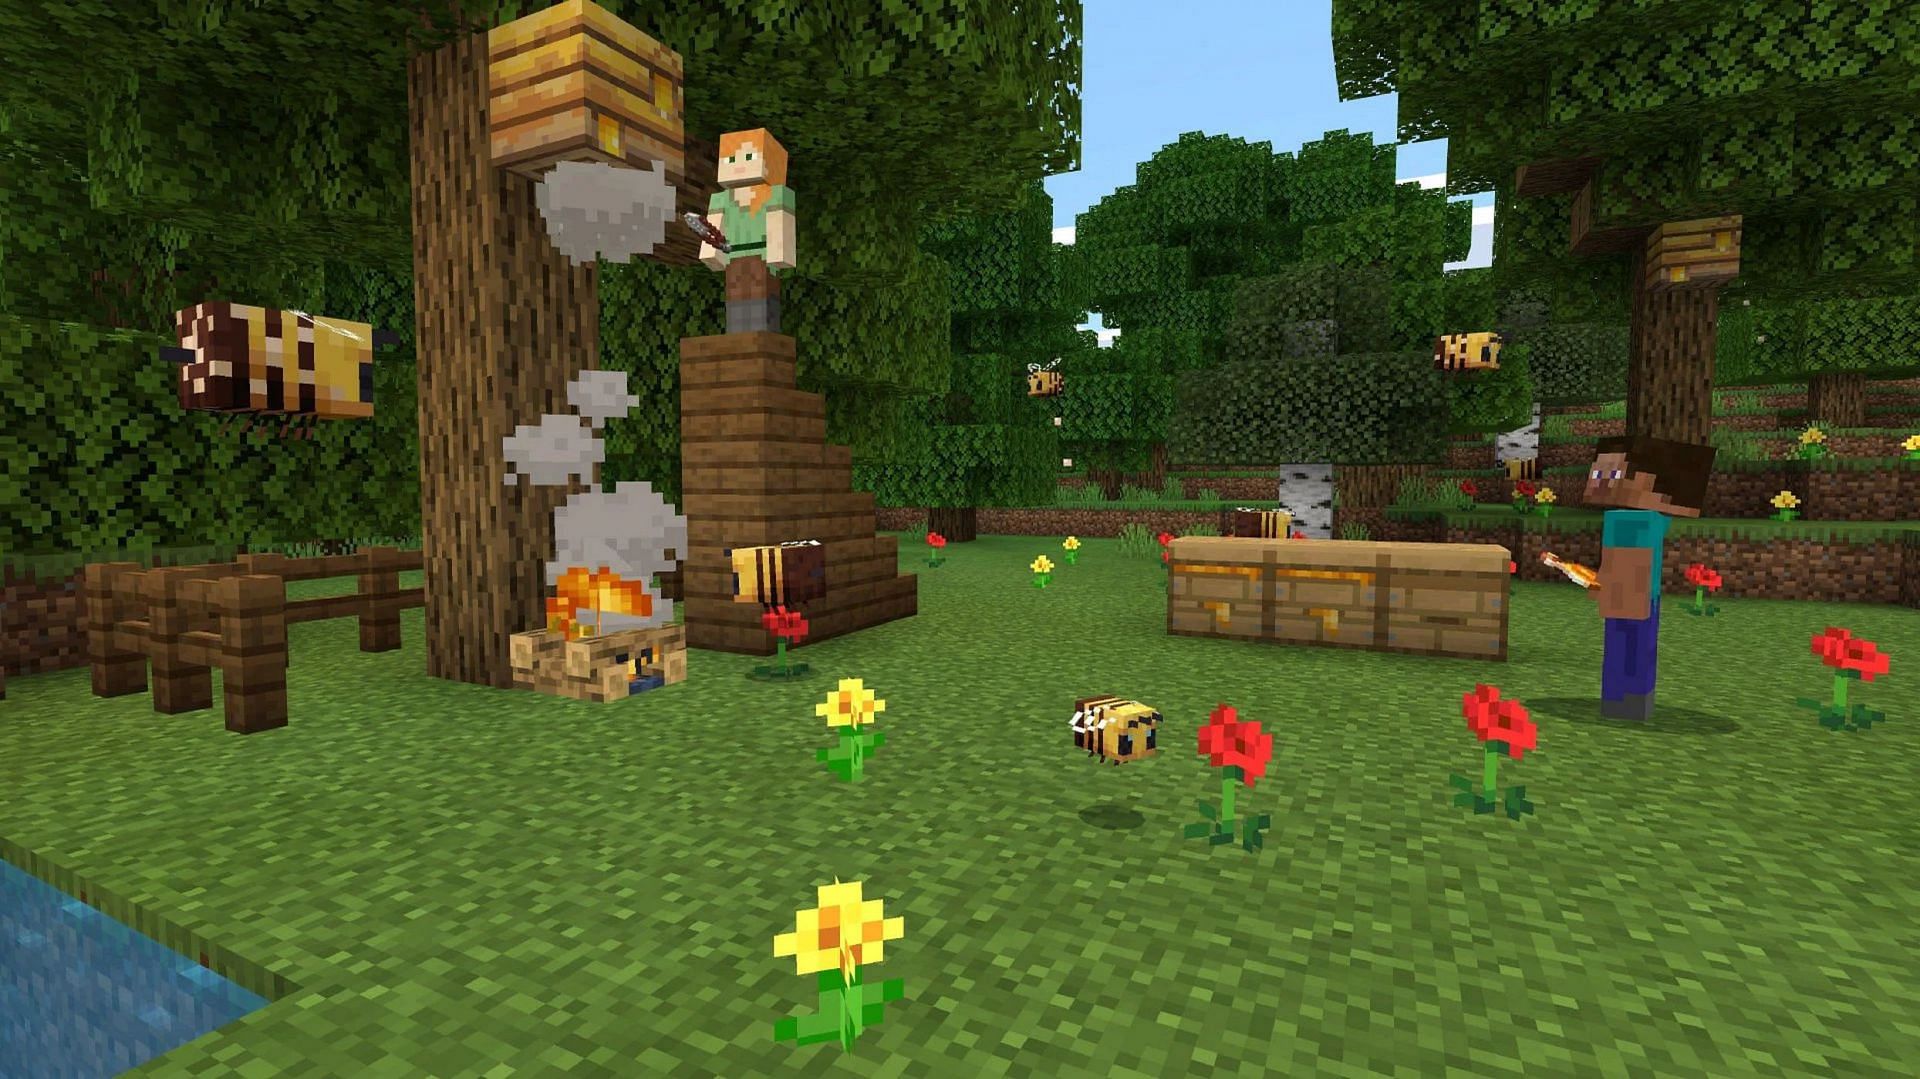 Bees, their nests, and honey were added in the Buzzy Bees update (Image via Mojang)